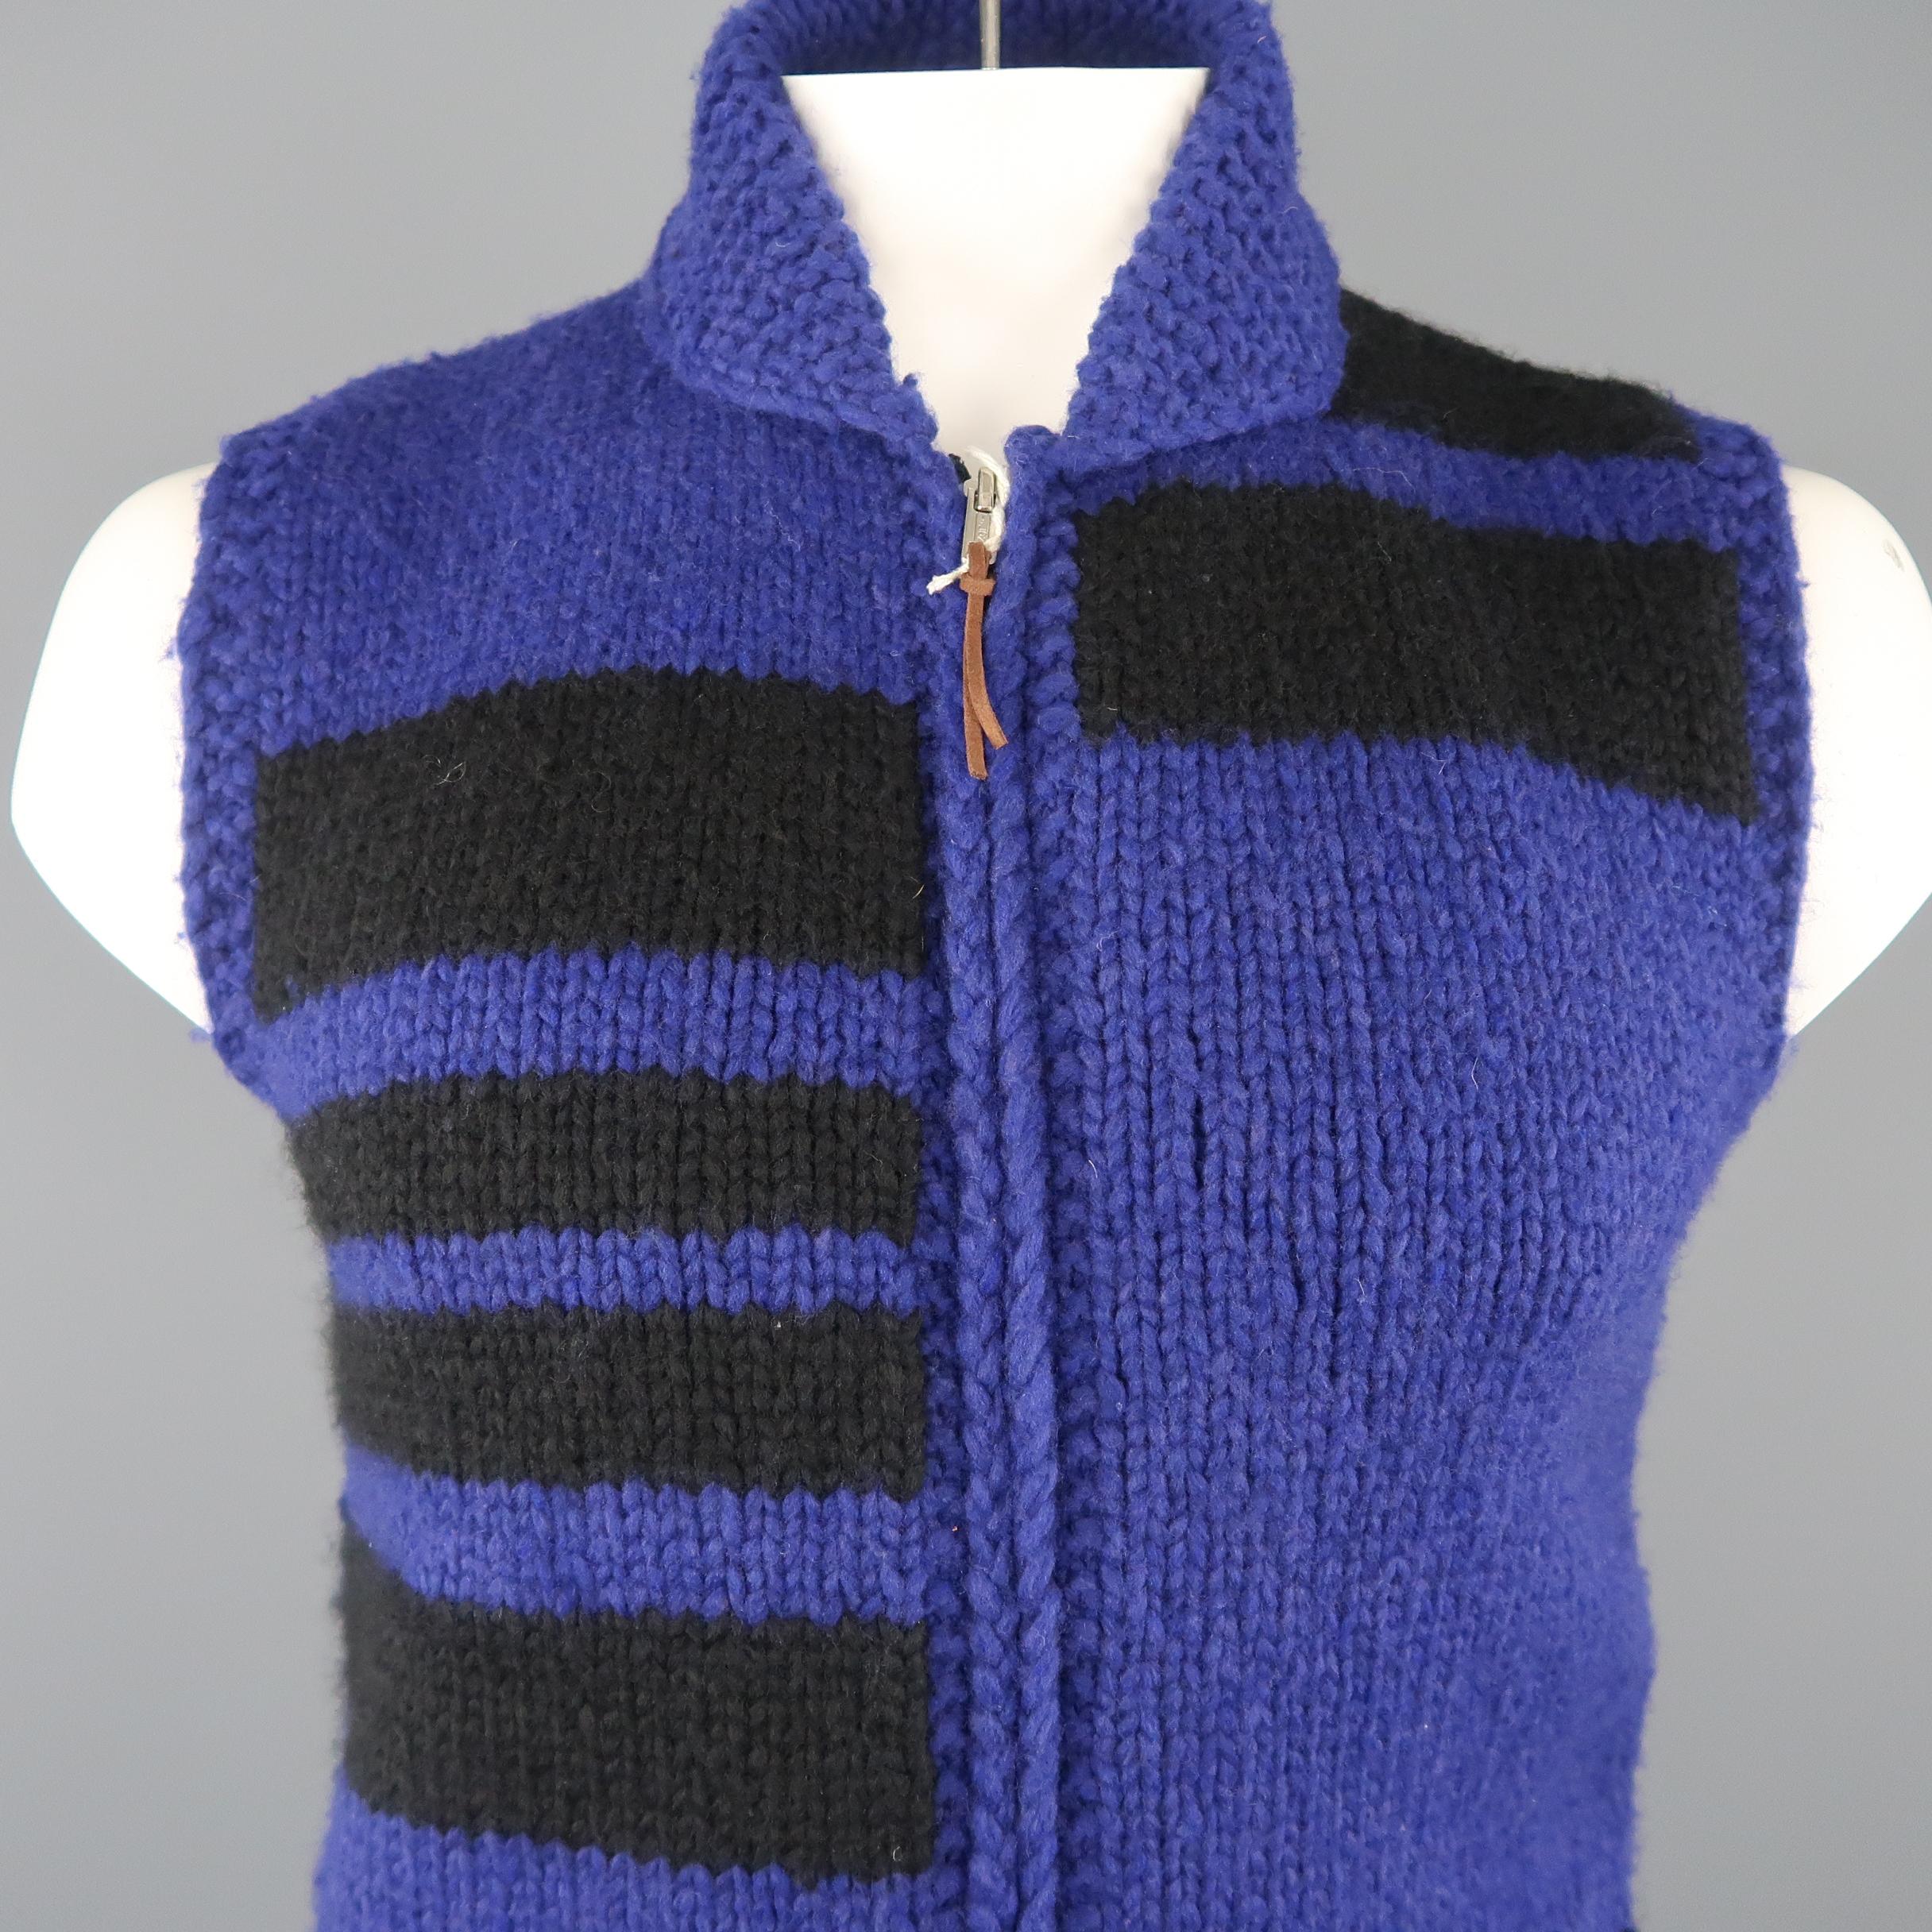 WOOLRICH vest comes in in purple knit with black geometric stripe pattern, shawl collar, patch pockets, and double zip front. Made in Canada.
 
New with Tags.
Marked: L
 
Measurements:
 
Shoulder: 17 in.
Chest: 42 in.
Length: 27 in.